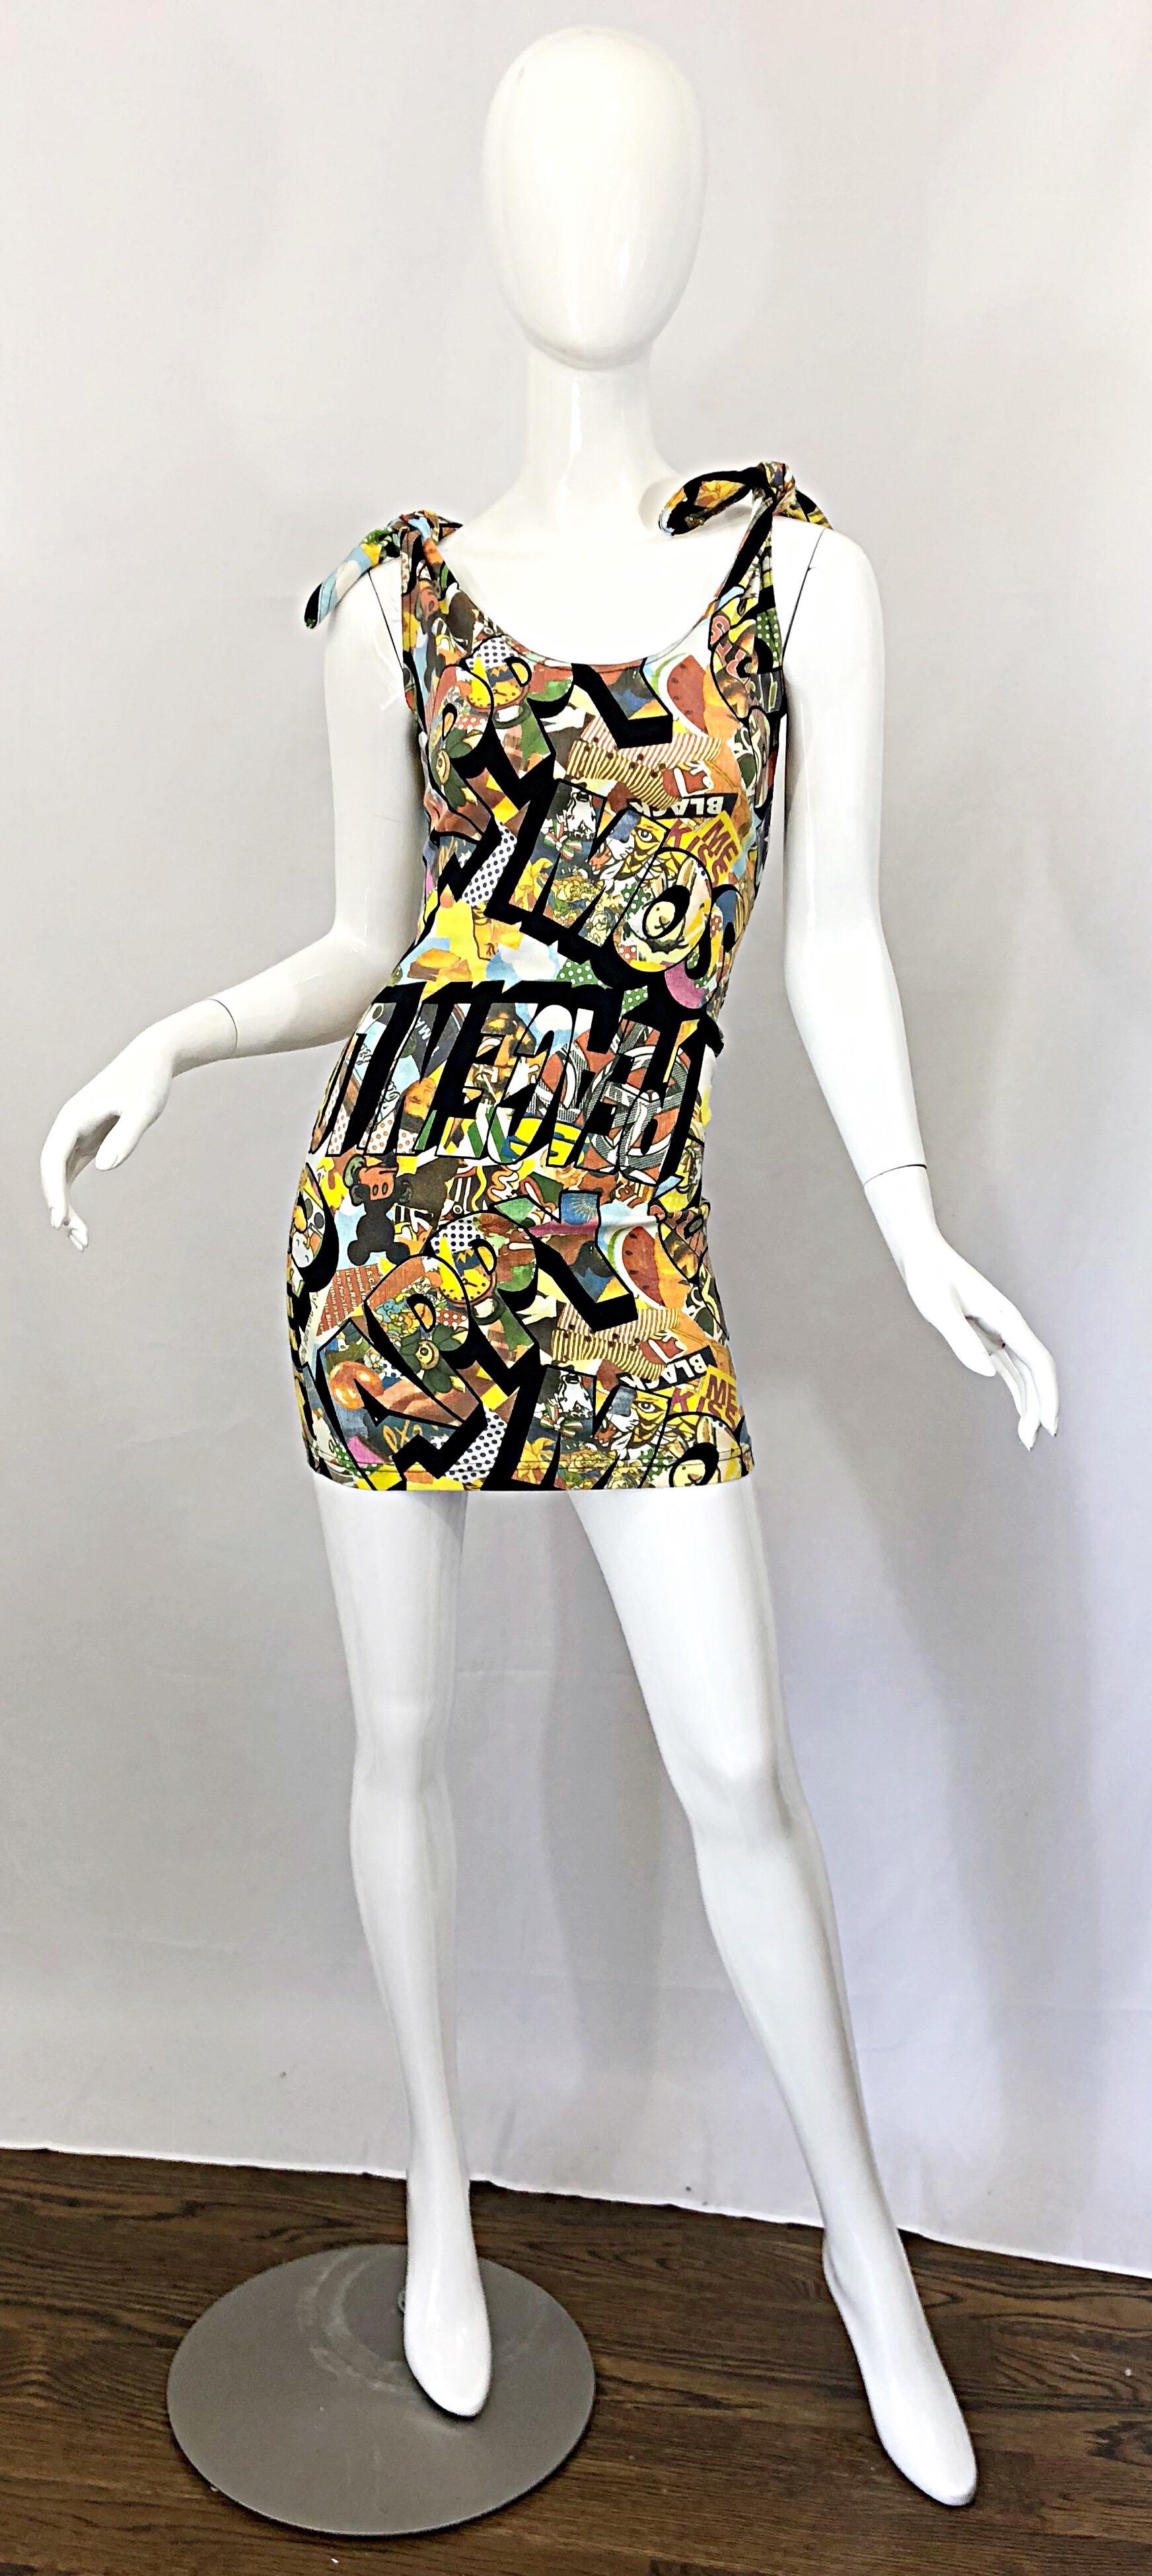 Rare and iconic 1990s MOSCHINO novelty print sexy mini dress! Features all of the cartoon characters Moschino used in the 90s. Mickey Mouse, Minnie Mouse, Popeye, Olive Oyl, amongst others. Hidden zipper up the side. Comfortable Cotton (98%) and